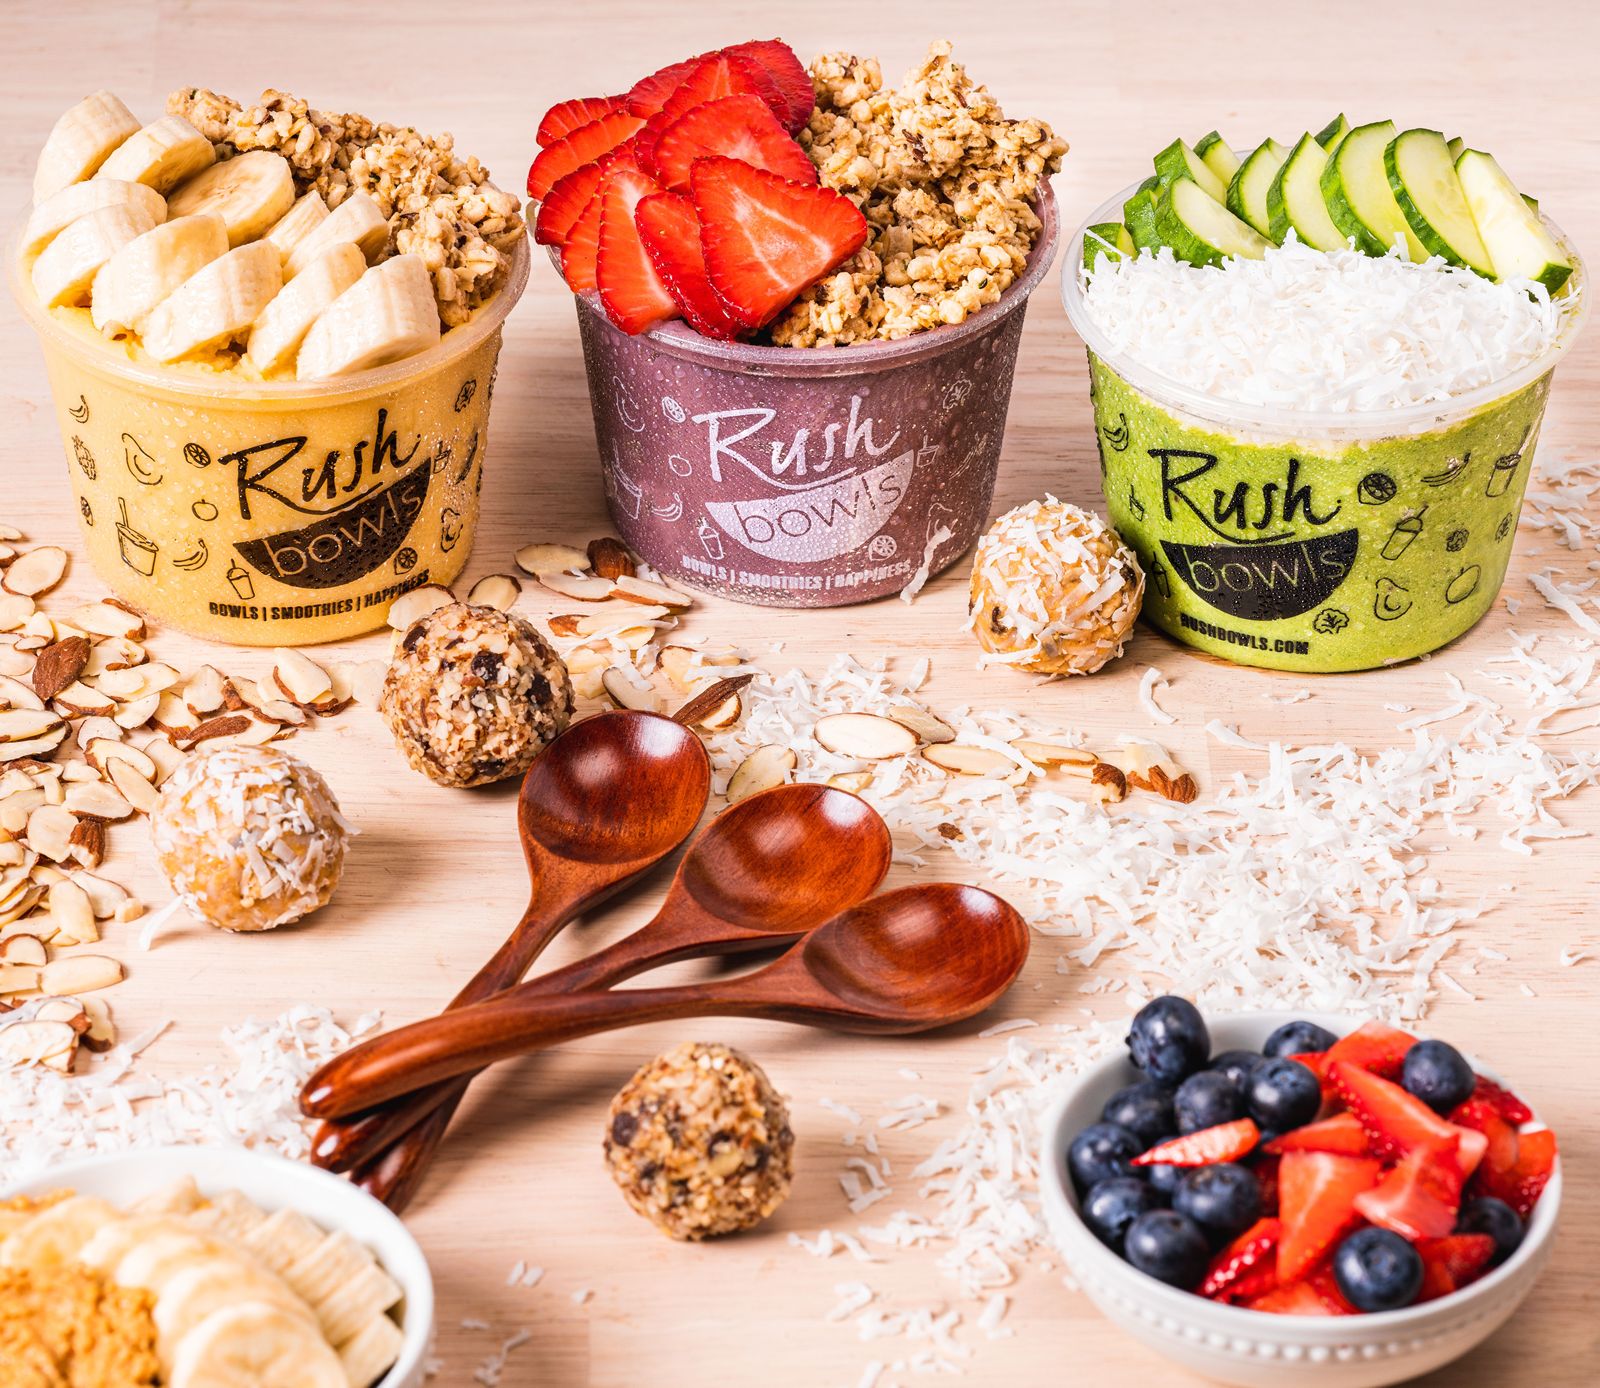 Rush Bowls Further Expands Brand Presence in Home Market